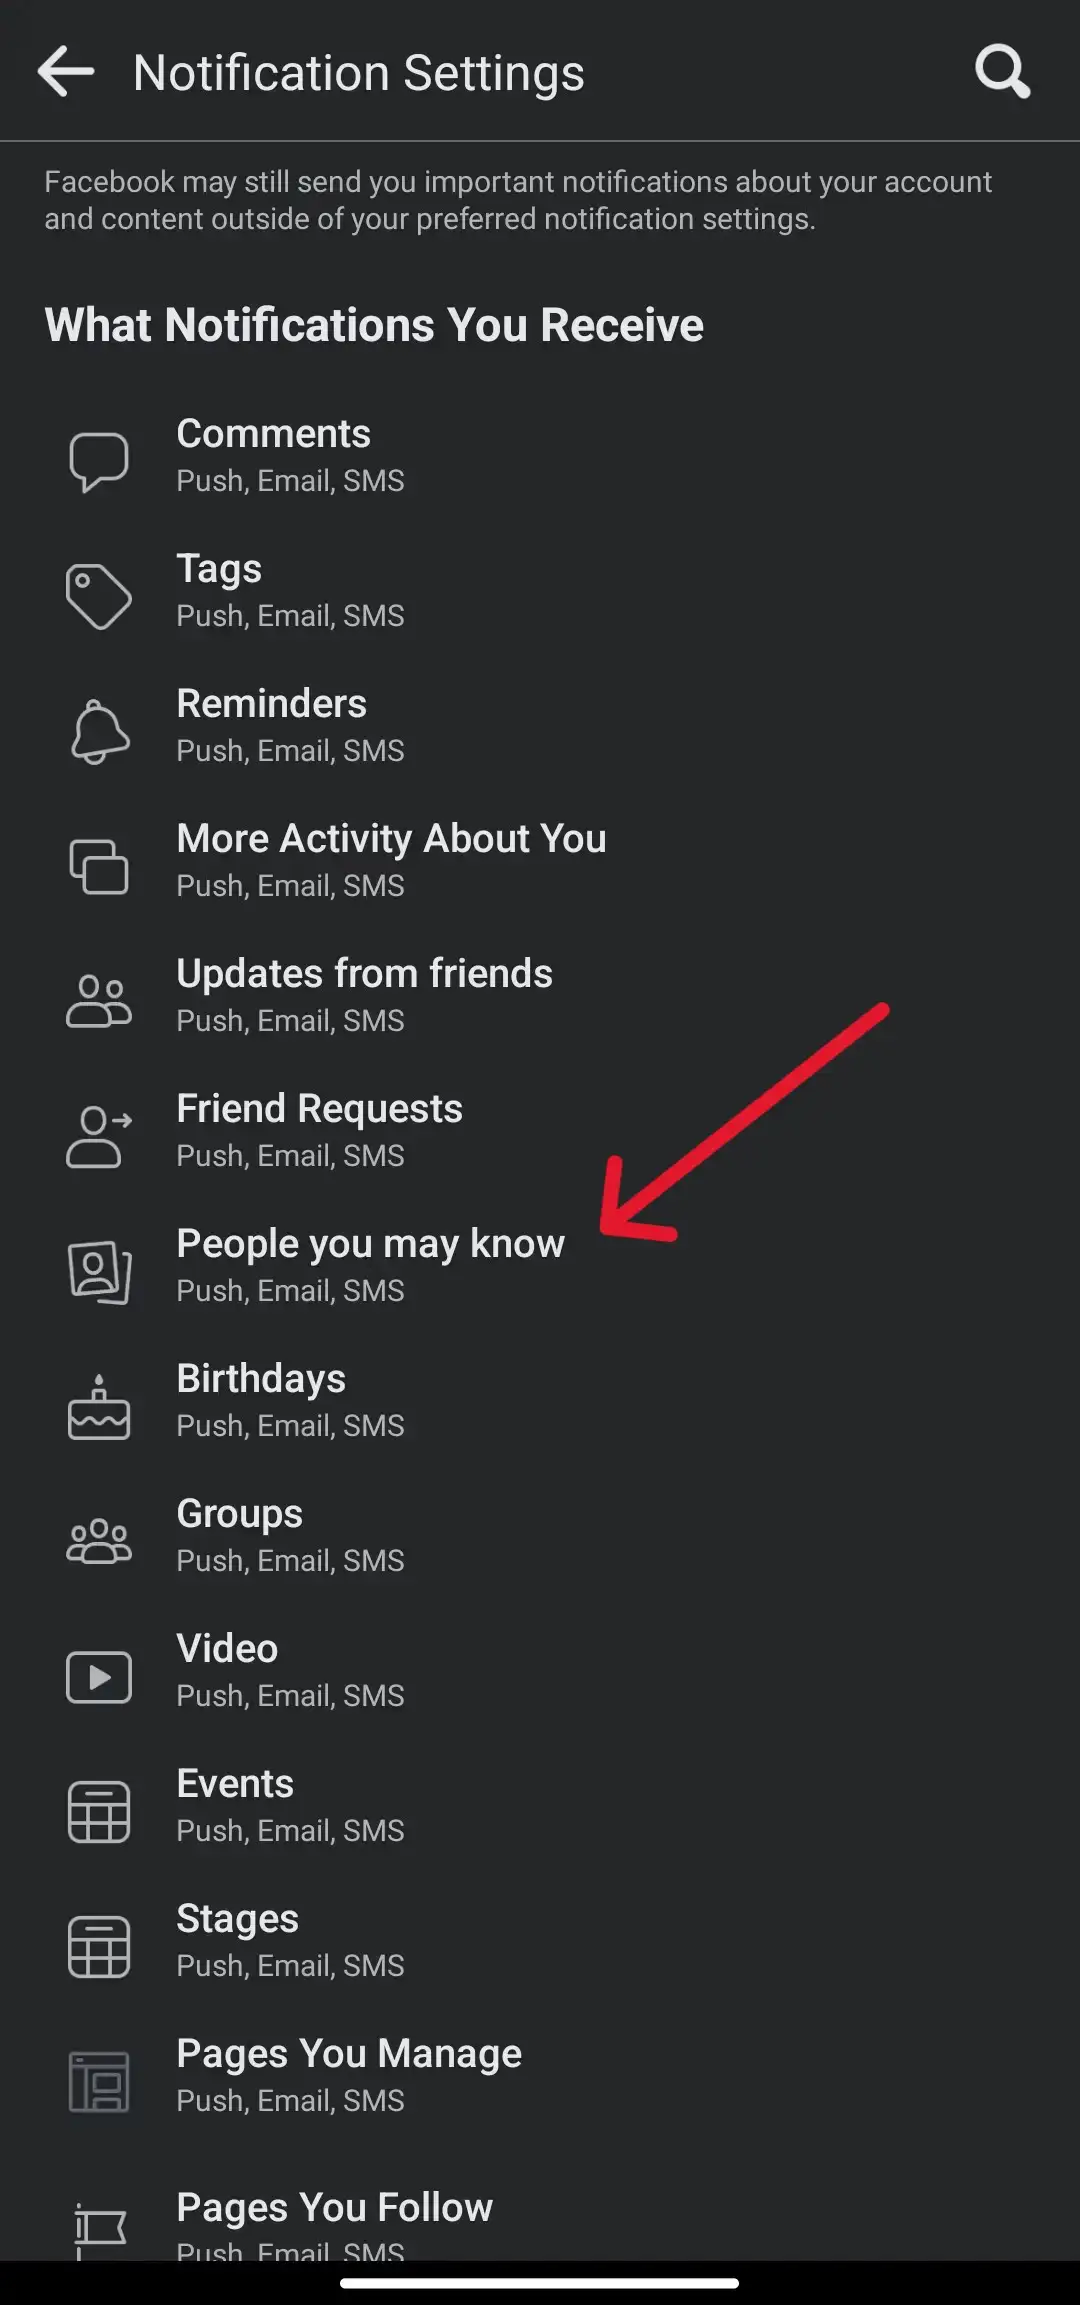 Access people you may know notifications on Facebook